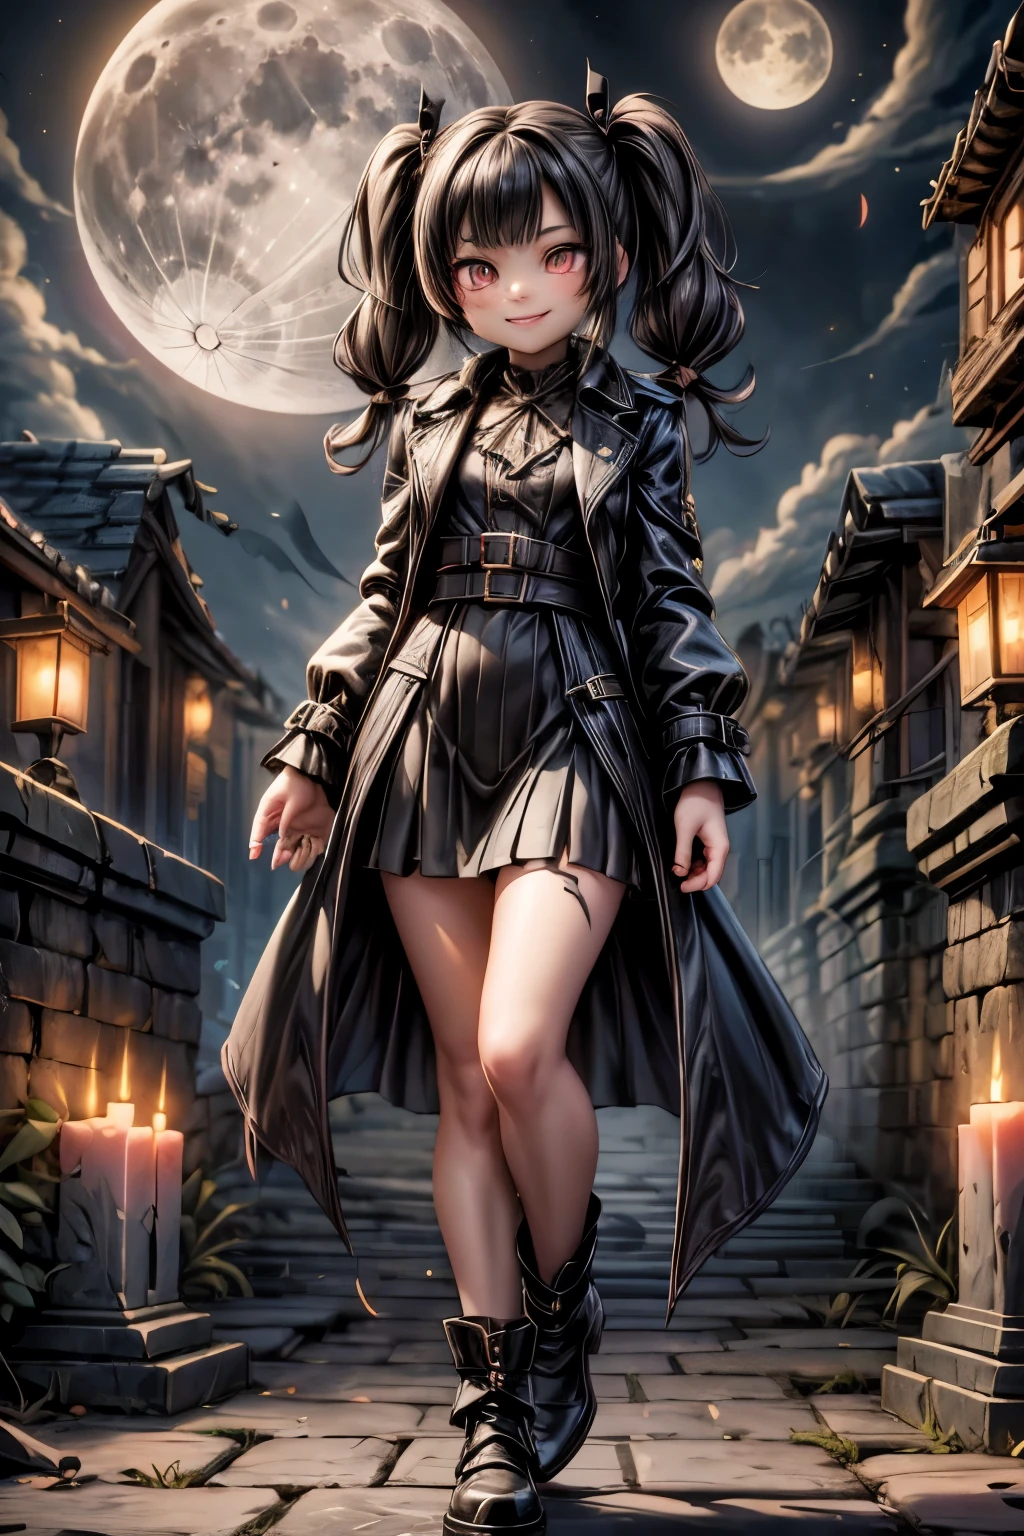 a vampire hunter girl smiling, wearing a Black Trench Coat and skirt, hairstyle pigtails, tighhighs, pumps, ancient ruins at night, castlevania art style, moon, lanterns and candles floating all around 